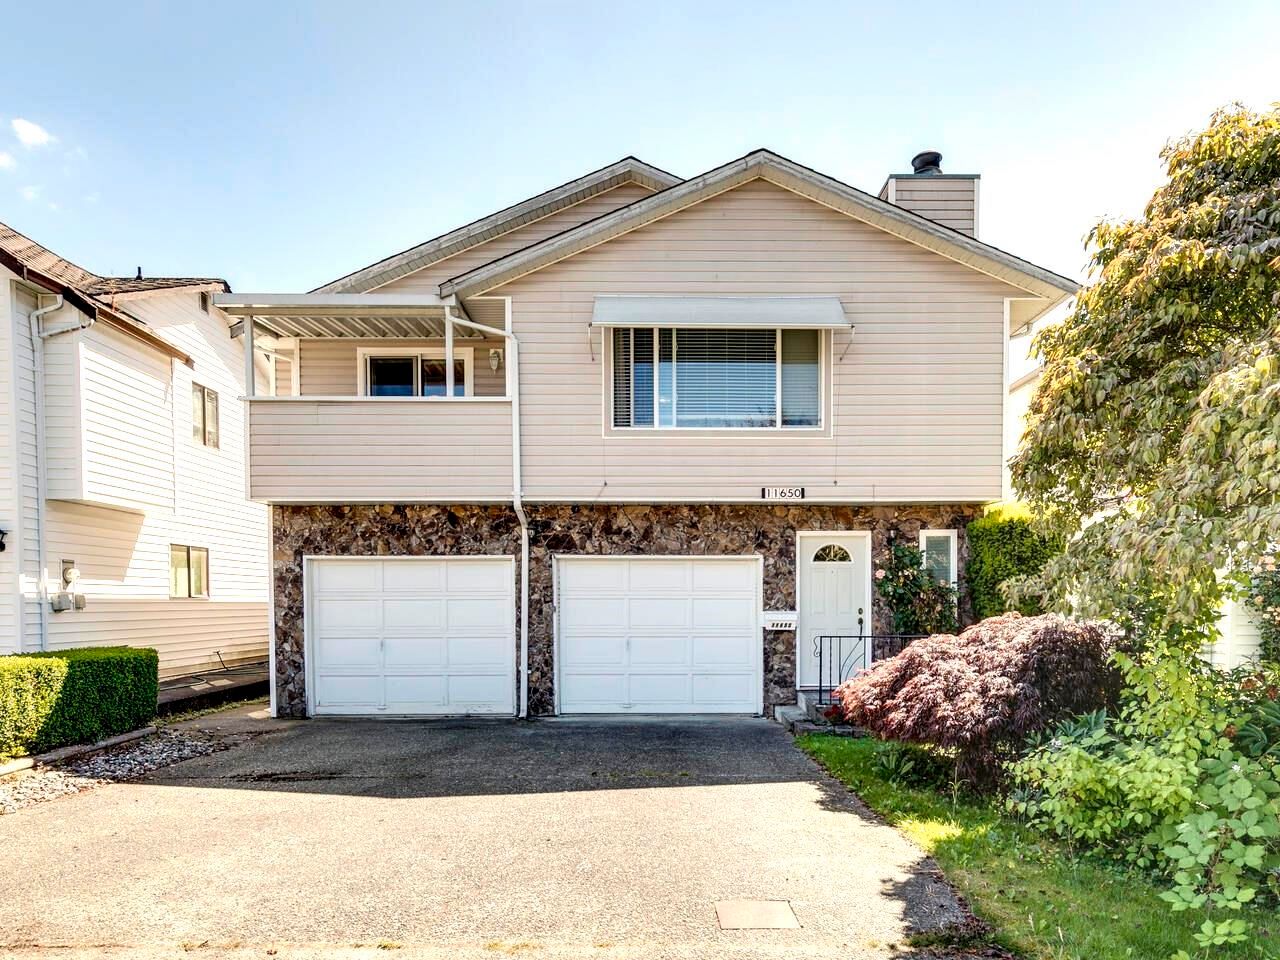 Open House on Saturday, July 23, 2022 1:00PM - 4:00PM
Definitely a "Must See" for serious Buyers. Covid protocols please.  Ask us about the 2003 renovations.  Thanks.  See you there.